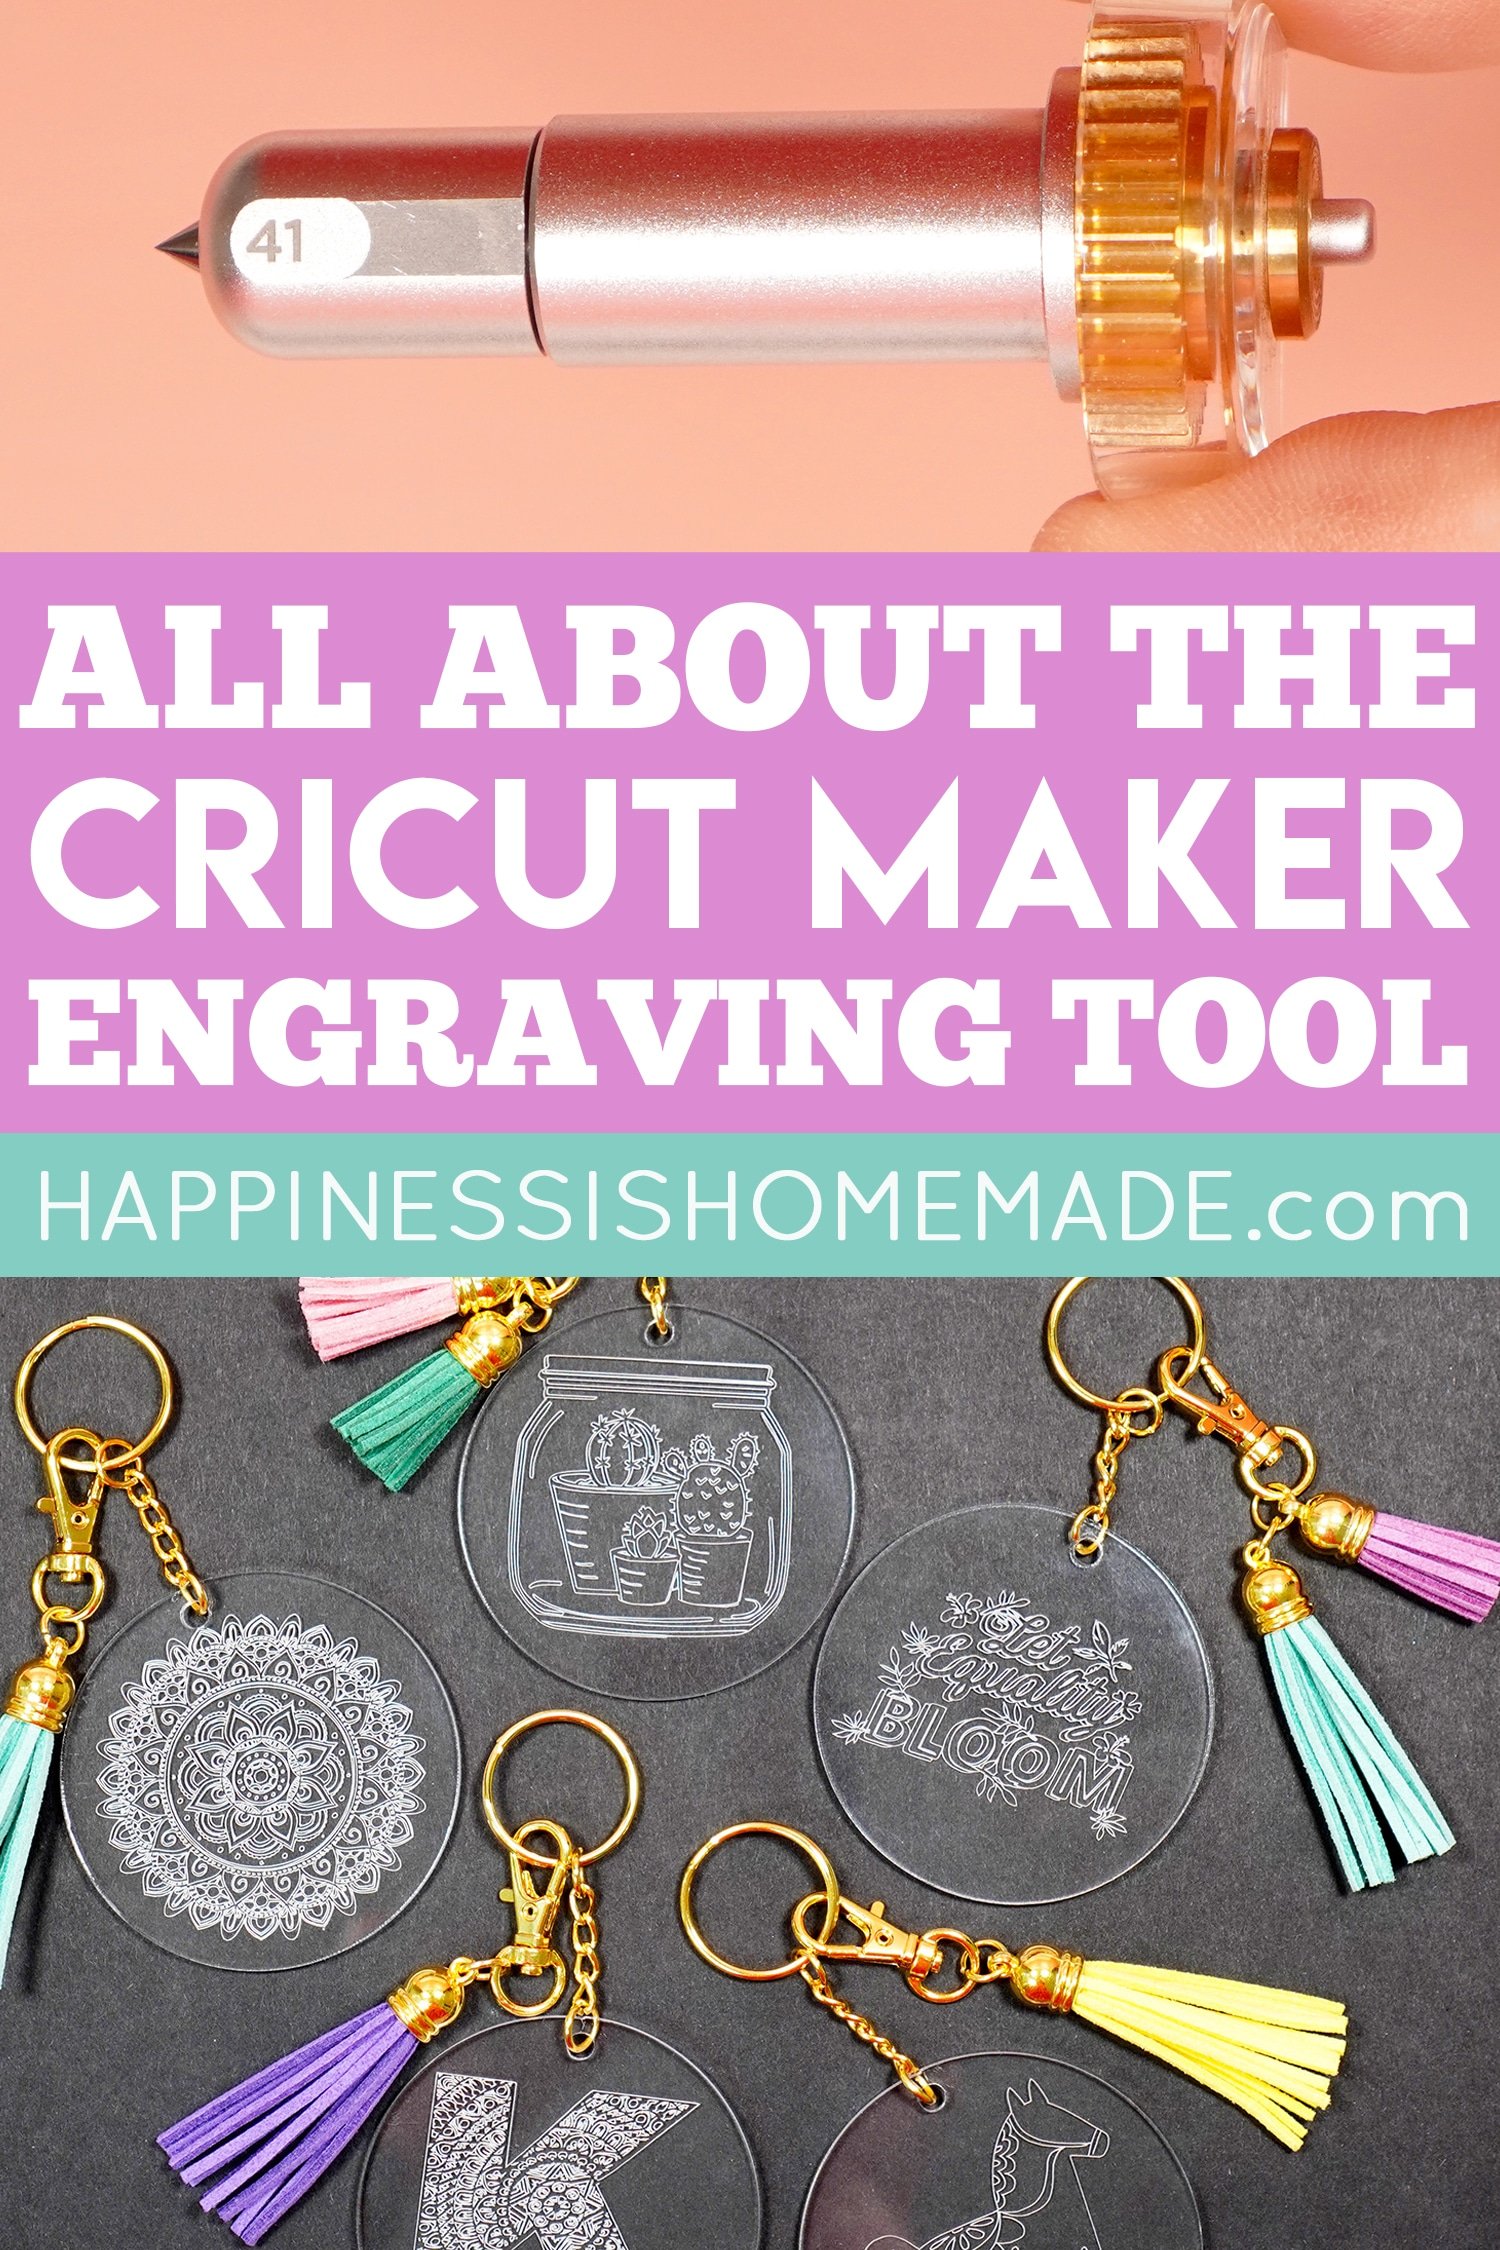 How to Use the Cricut Maker Engraving Tool